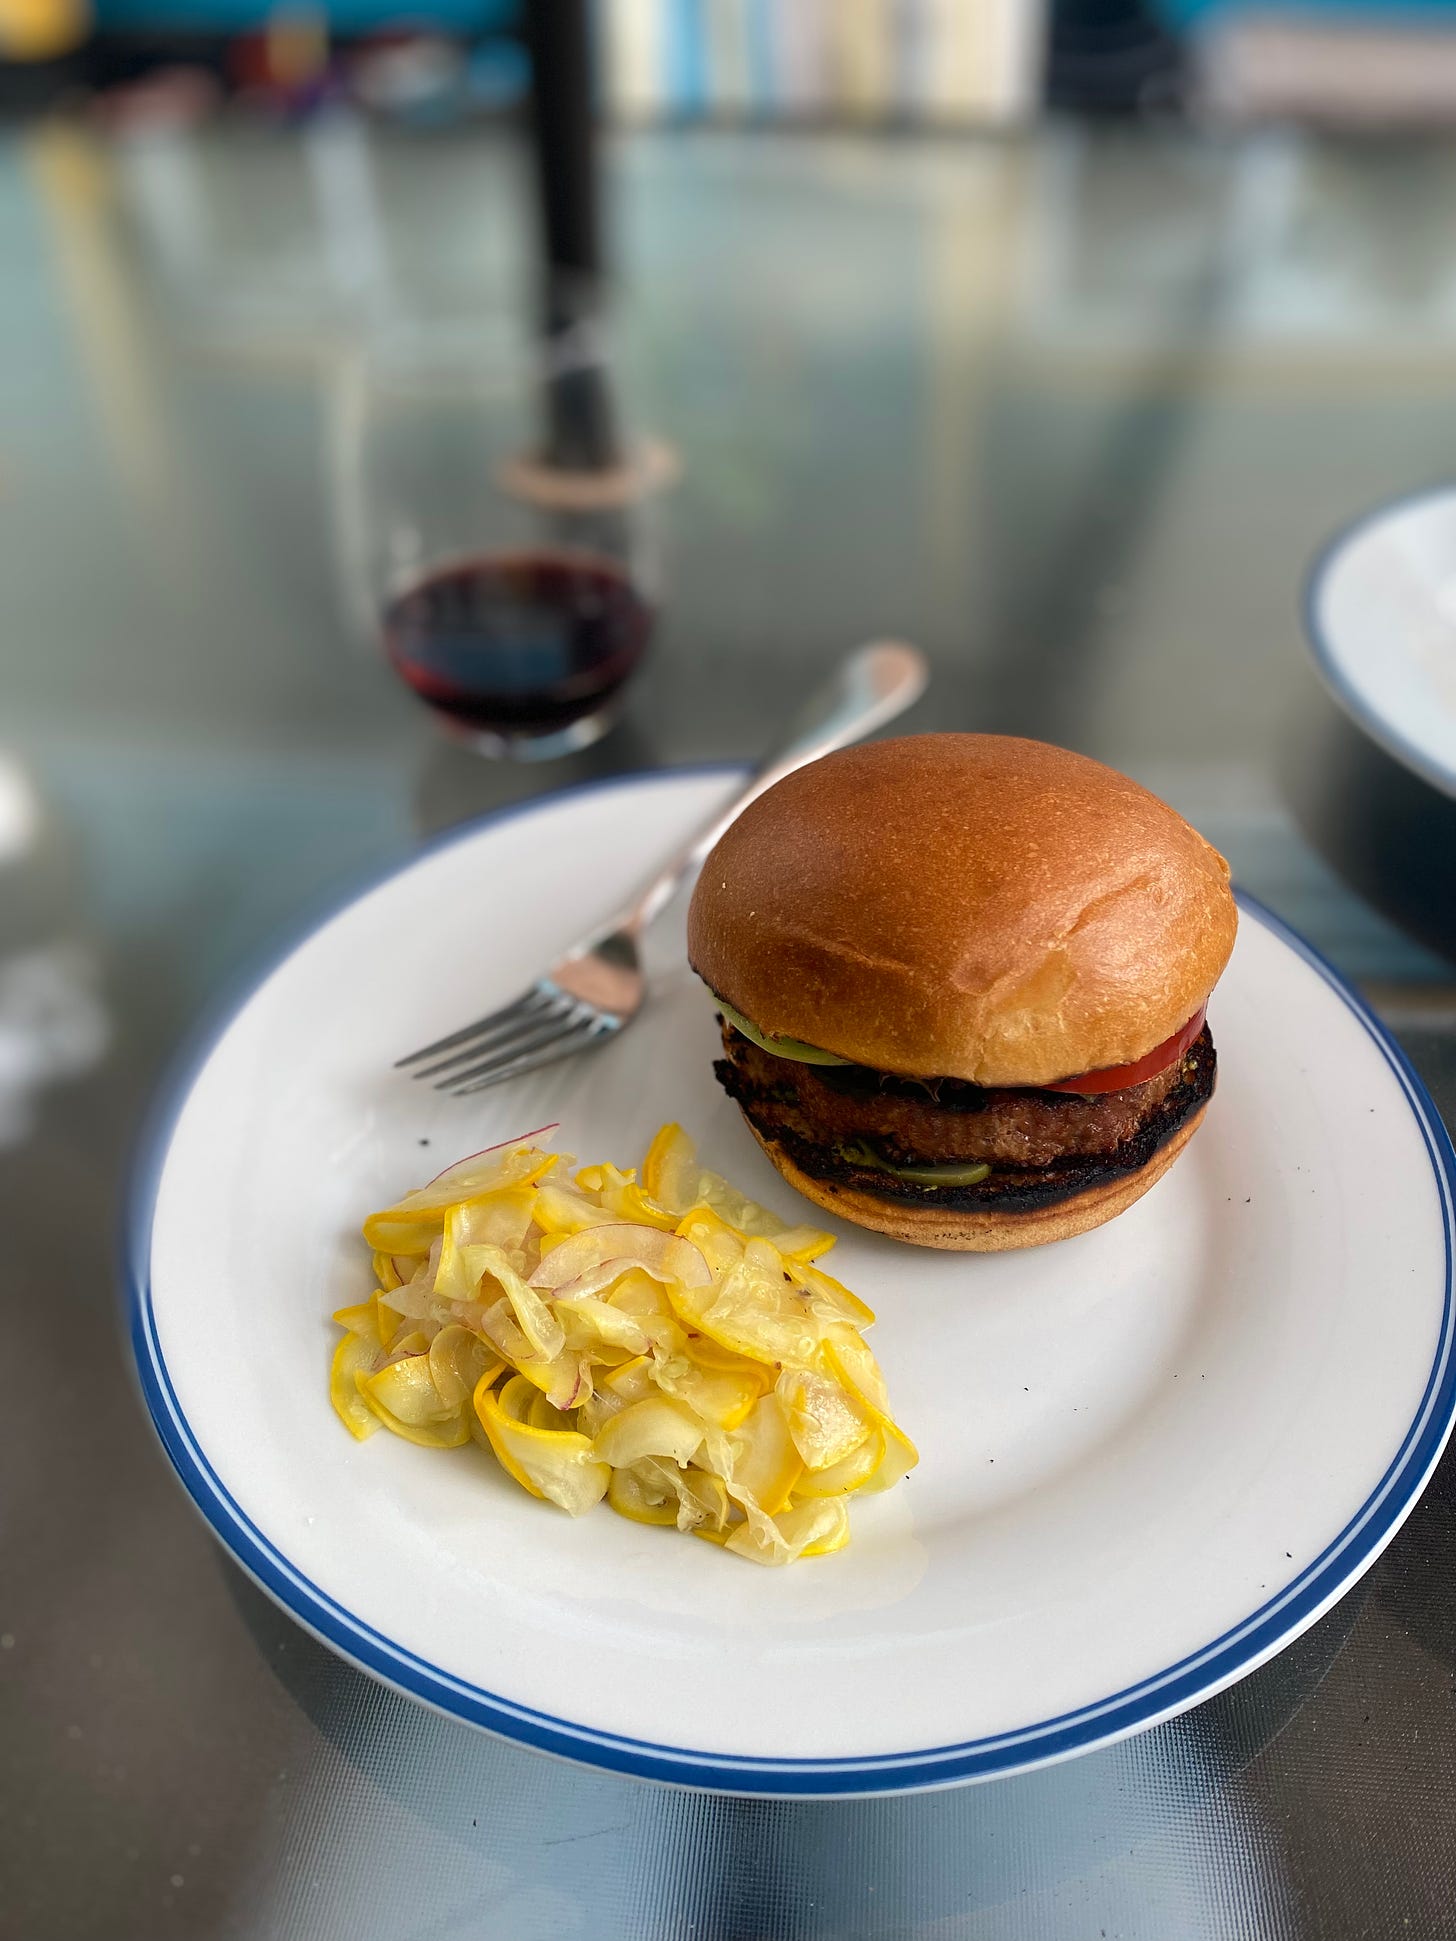 A white plate with a blue rim, holding a Beyond burger on a grilled bun and a shaved yellow zucchini salad. A fork rests on the plate at the back, and blurred in the background is a stemless glass of red wine.